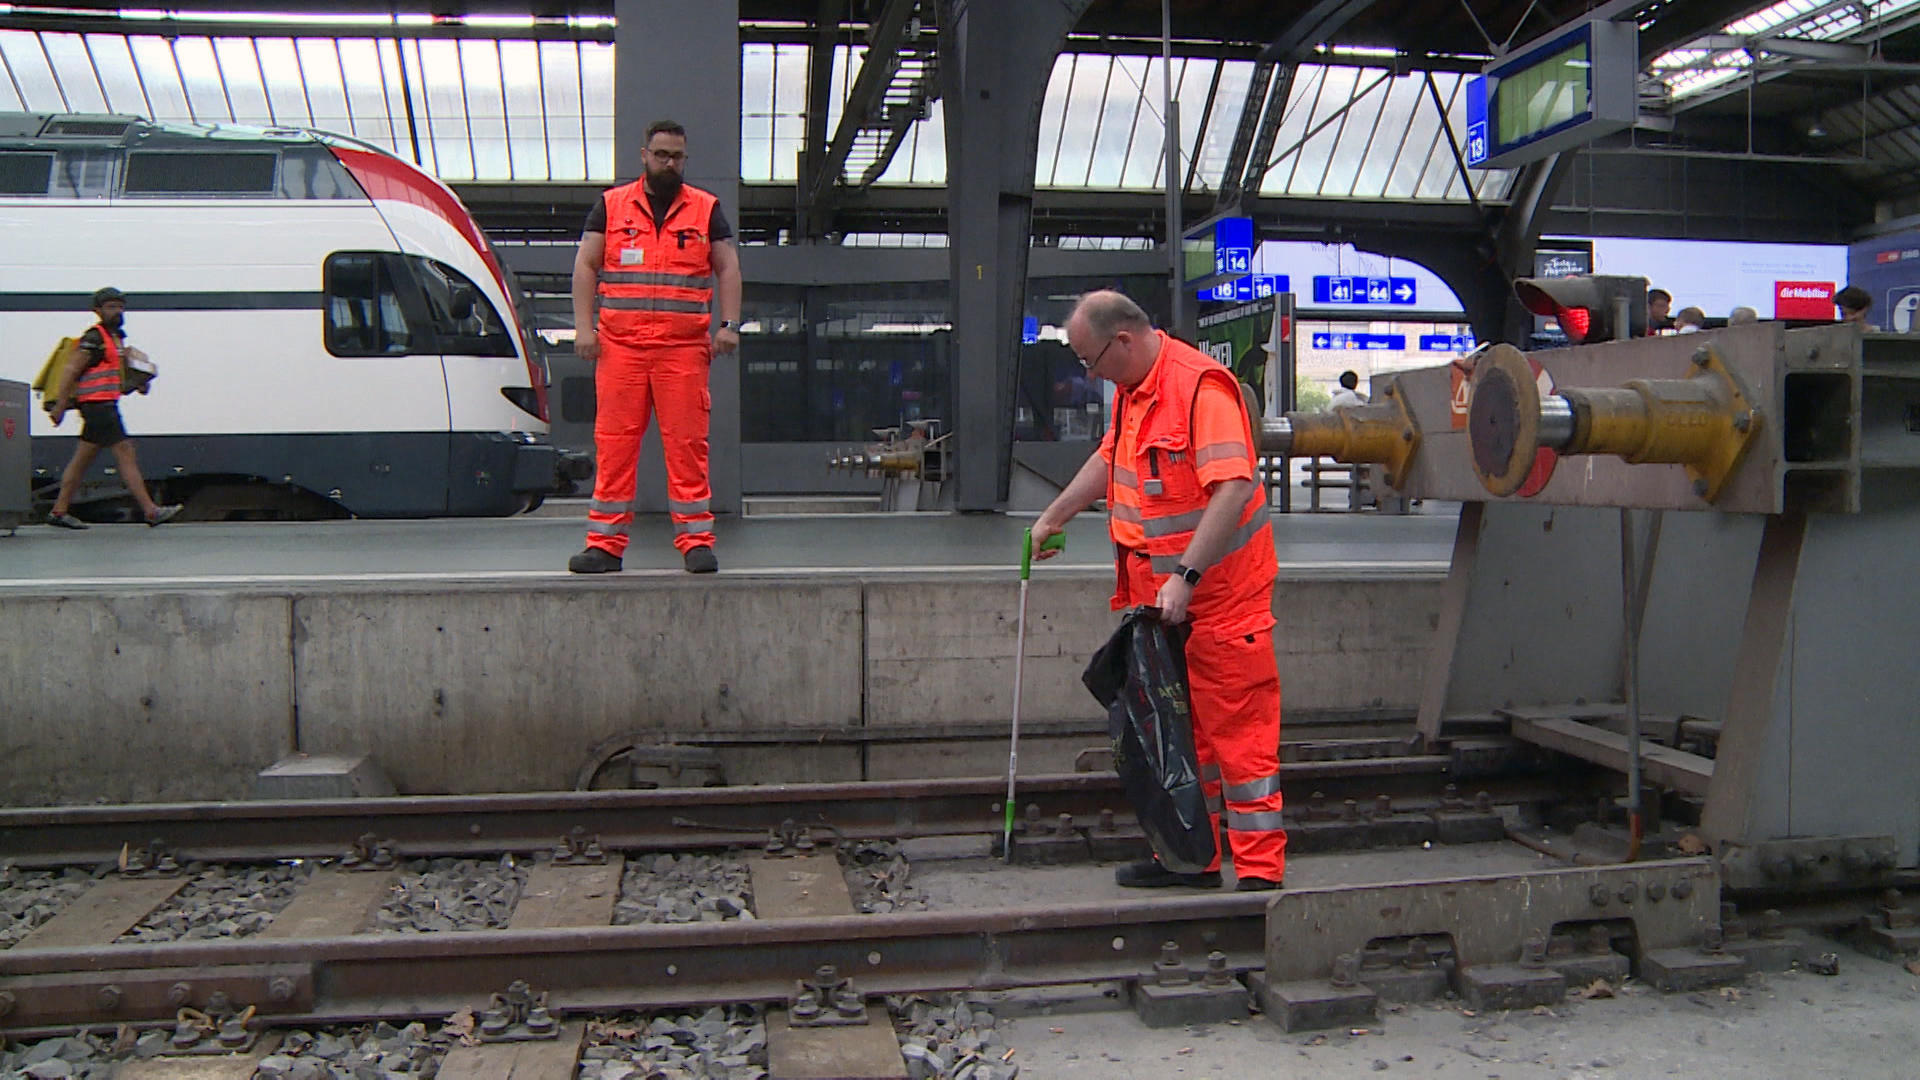 Man removing cigarette butts from railway track at Zurich train station